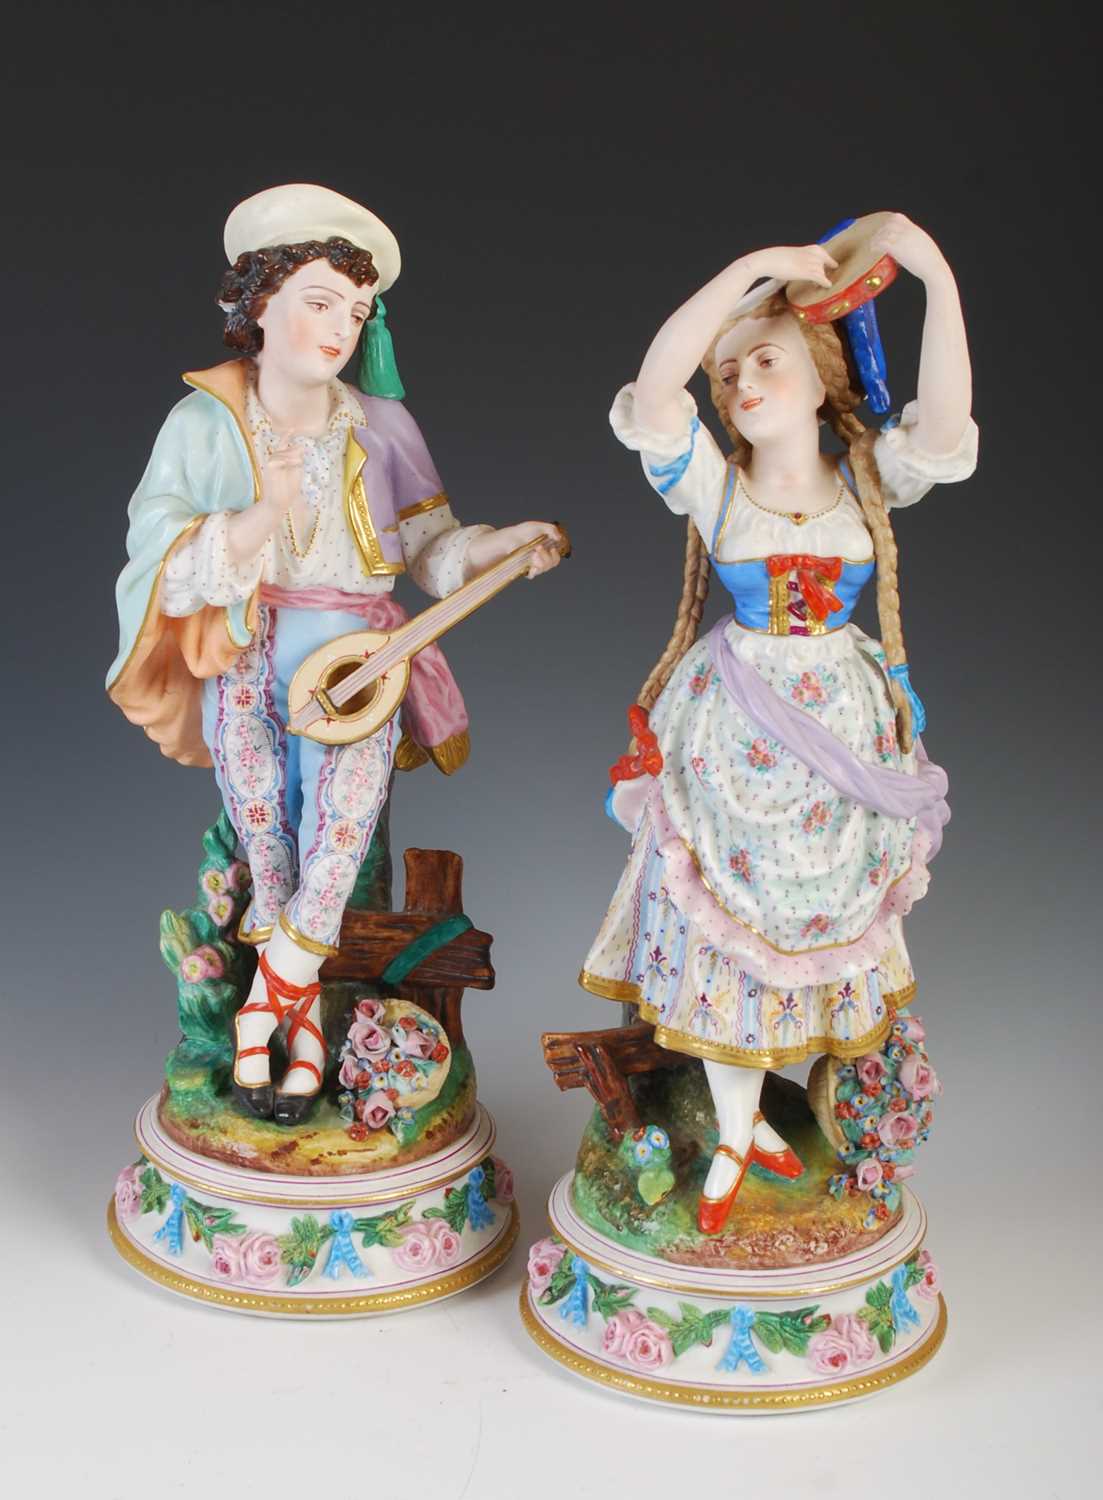 A pair of late 19th century French Bisque porcelain figures, modelled as a boy playing the